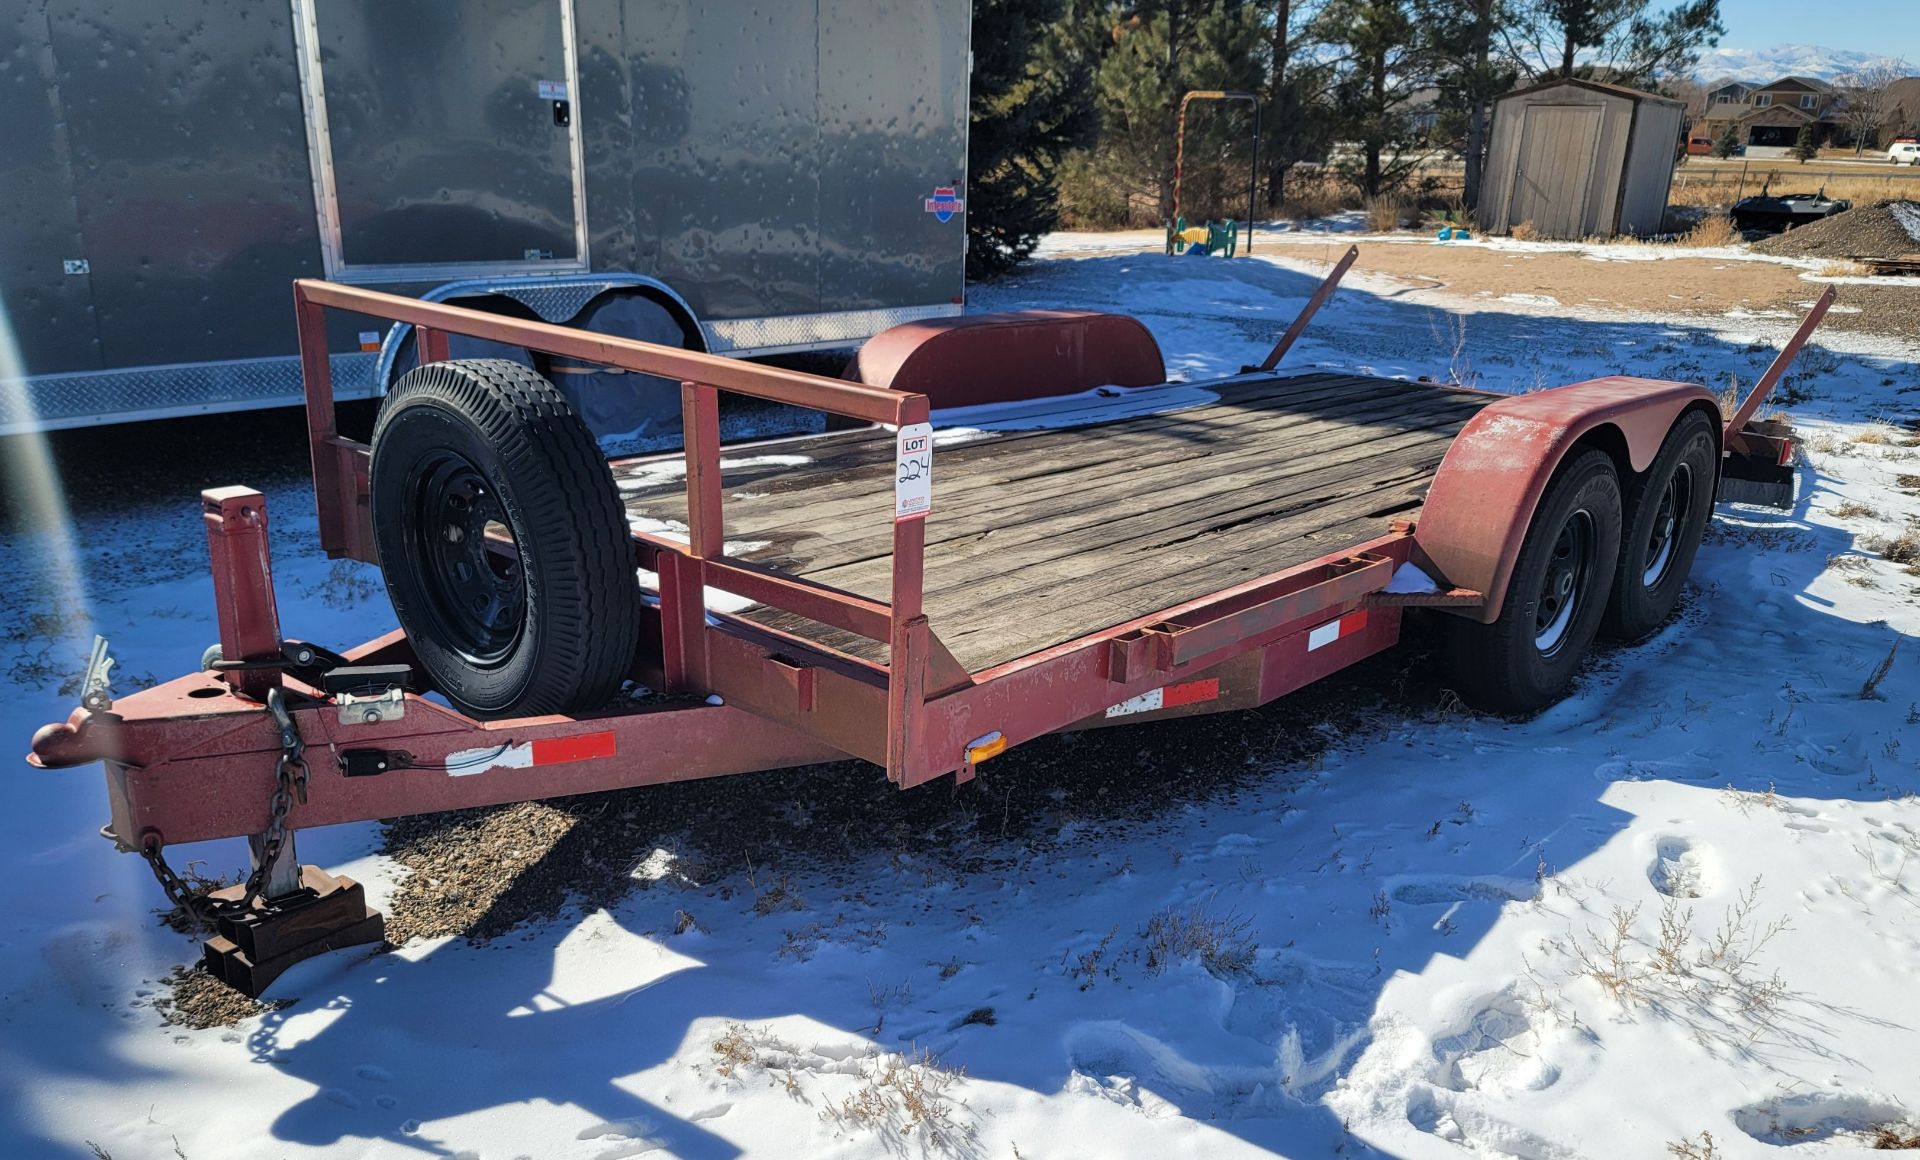 FLATBED TRAILER, 16' X 80", LOADING RAMP, DUAL AXLE, BUMPER PULL, SPARE TIRE, (2) 60" X 15" BED LOAD